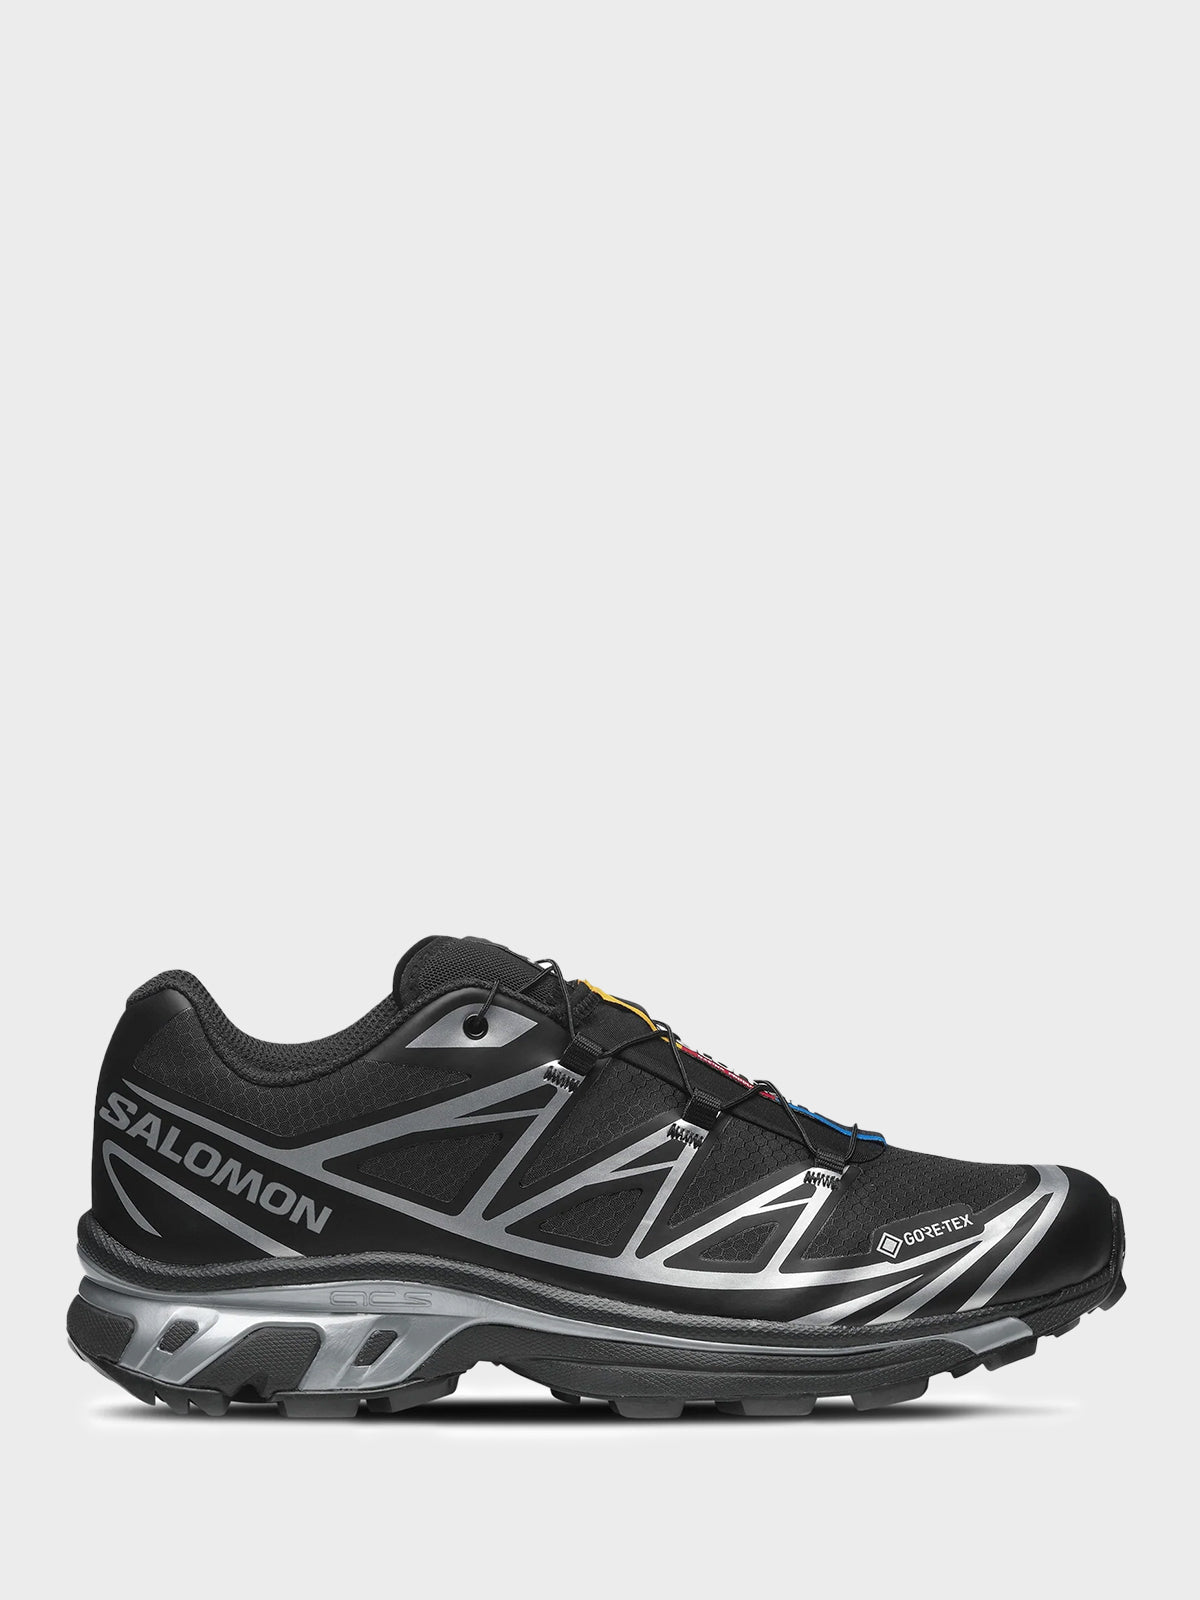 XT-6 GTX Sneakers in Black and Silver